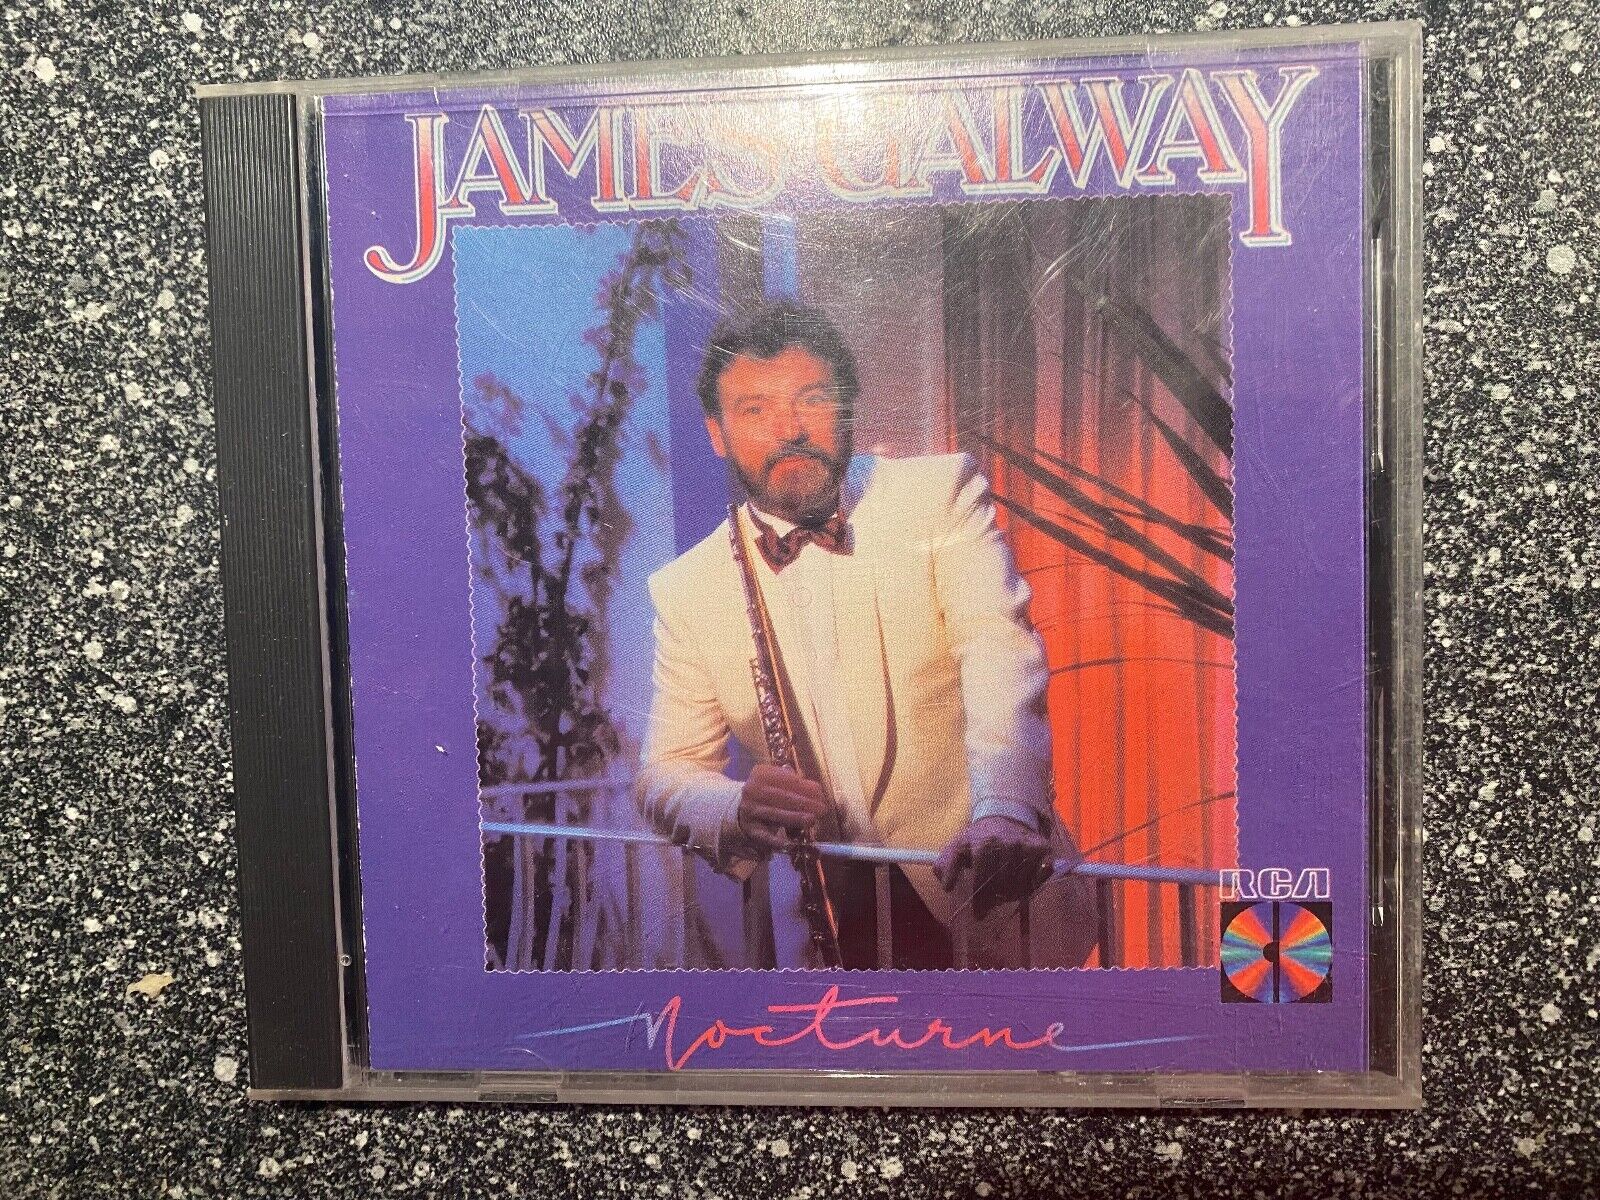 JAMES GALWAY "NOCTURNE" 1983 CD 13 TRACK JAPANESE 1. PRESSING RCA RED SEAL JAPAN